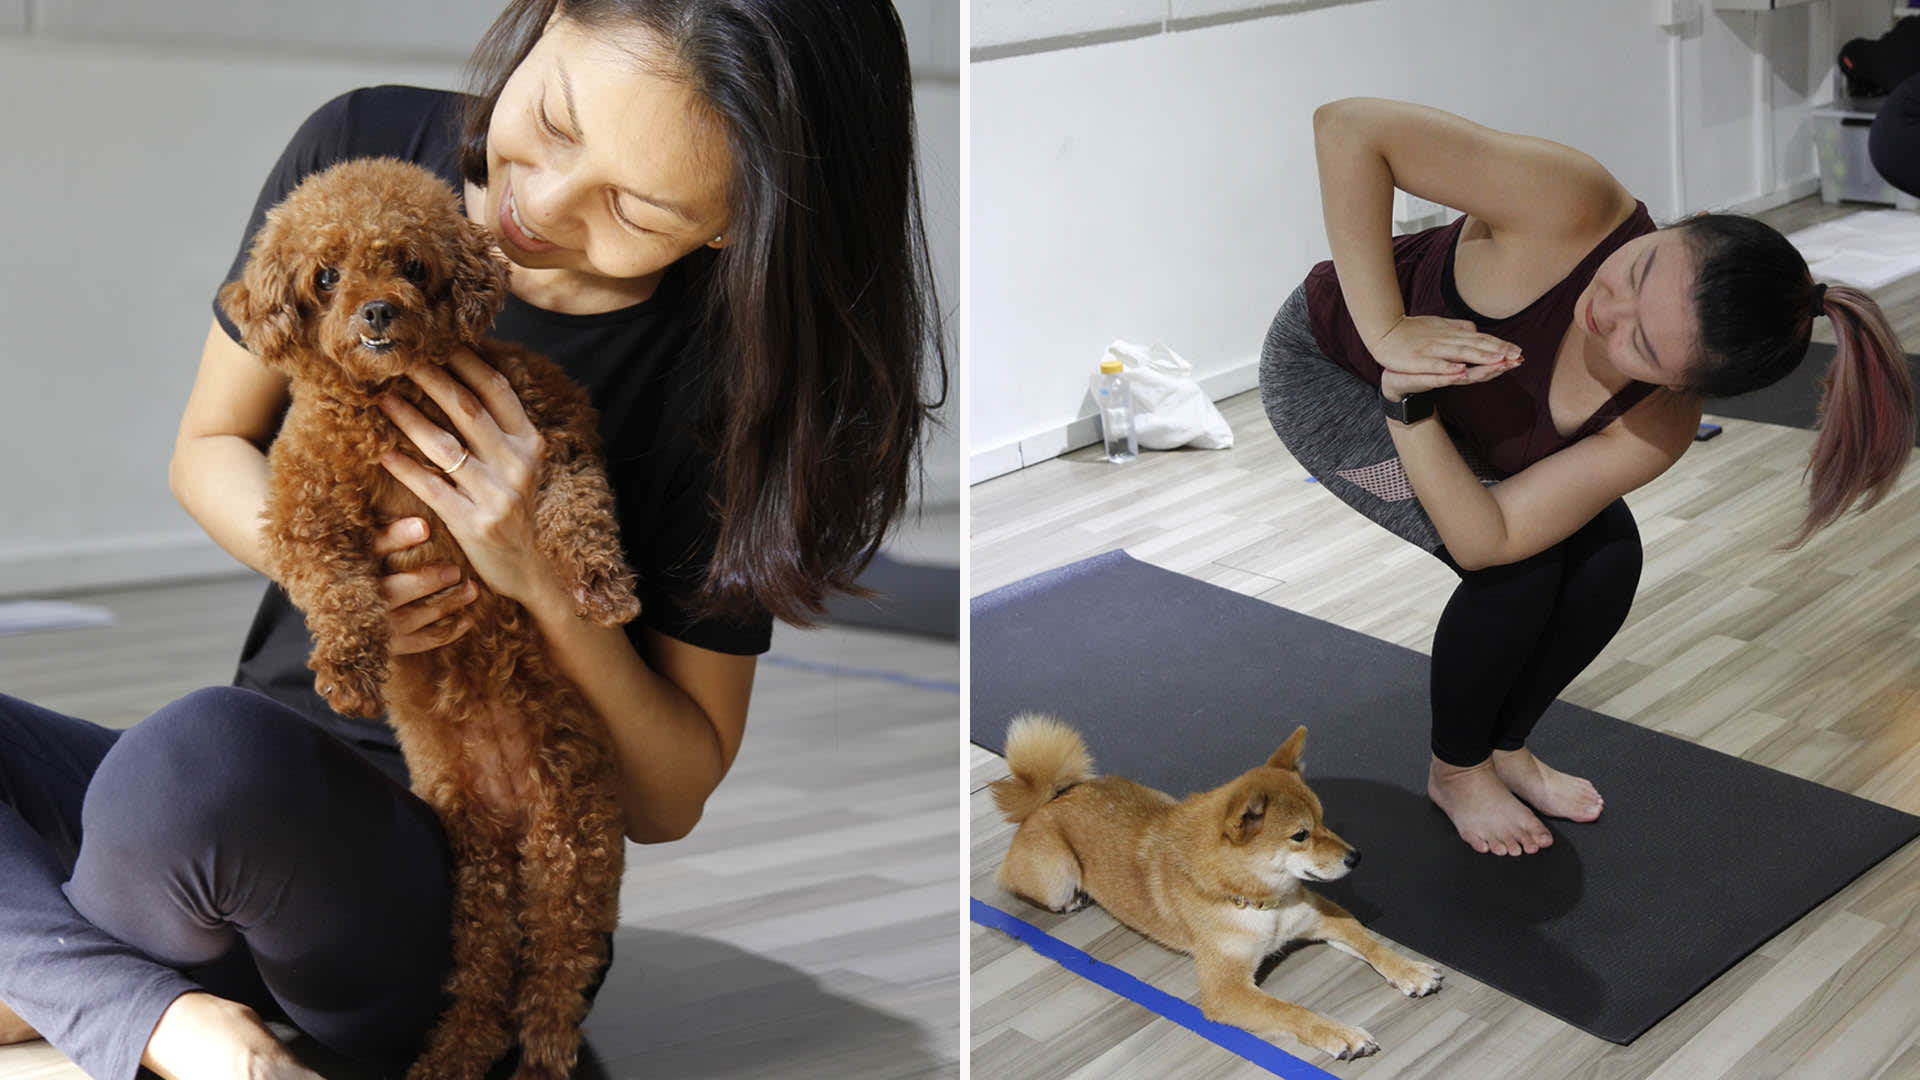 Dogs Are Allowed At This Yoga Studio — Bring Your Pup Along, Or Hang Out With Other Doggos If You Don't Have One